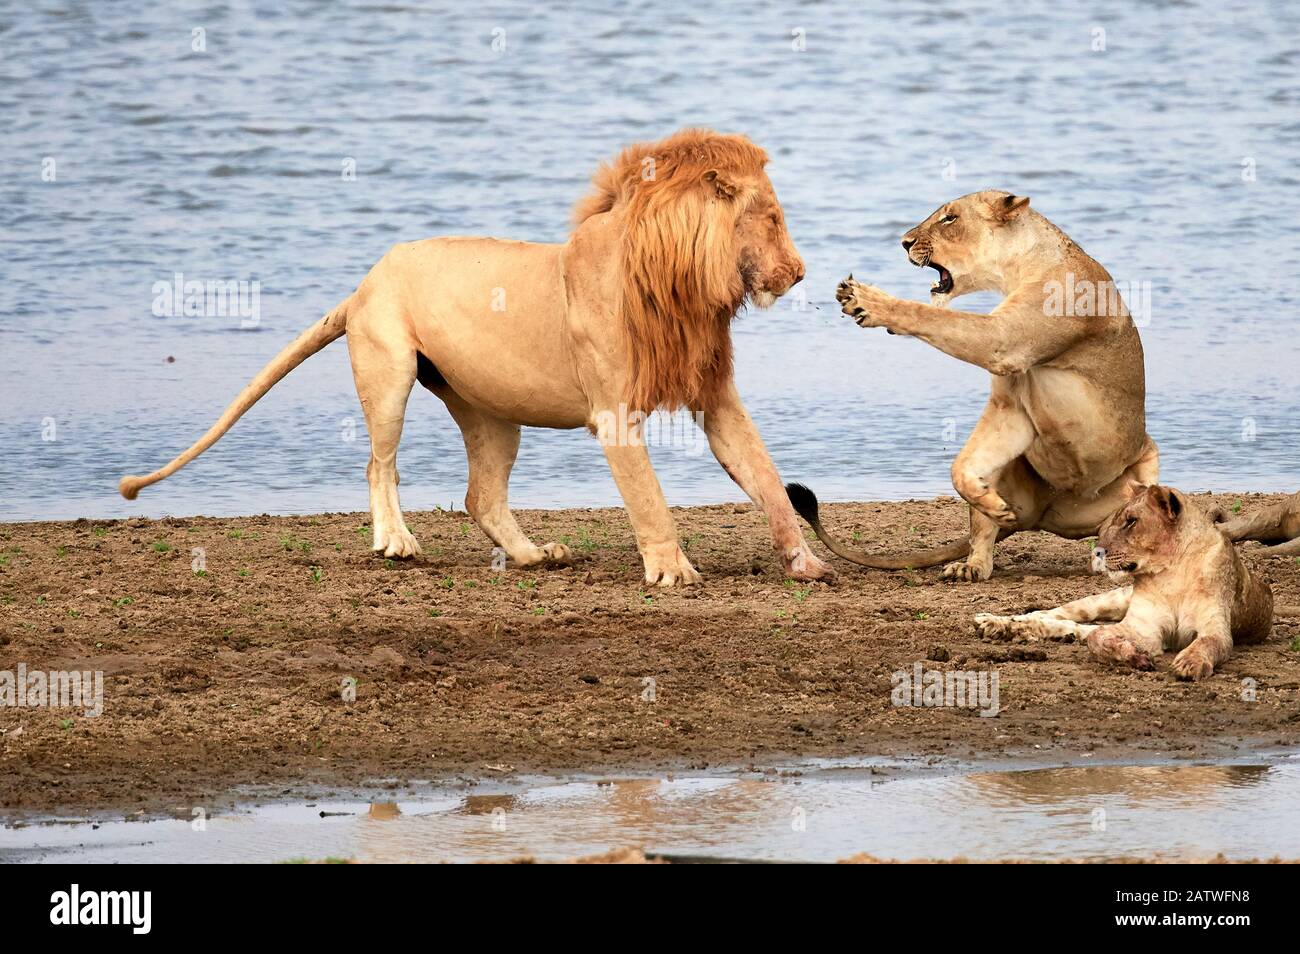 Lioness (Panthera leo), aggressively rebuffing male lion banks of the Luangwa river, South Luangwa National Park, Zambia Stock Photo